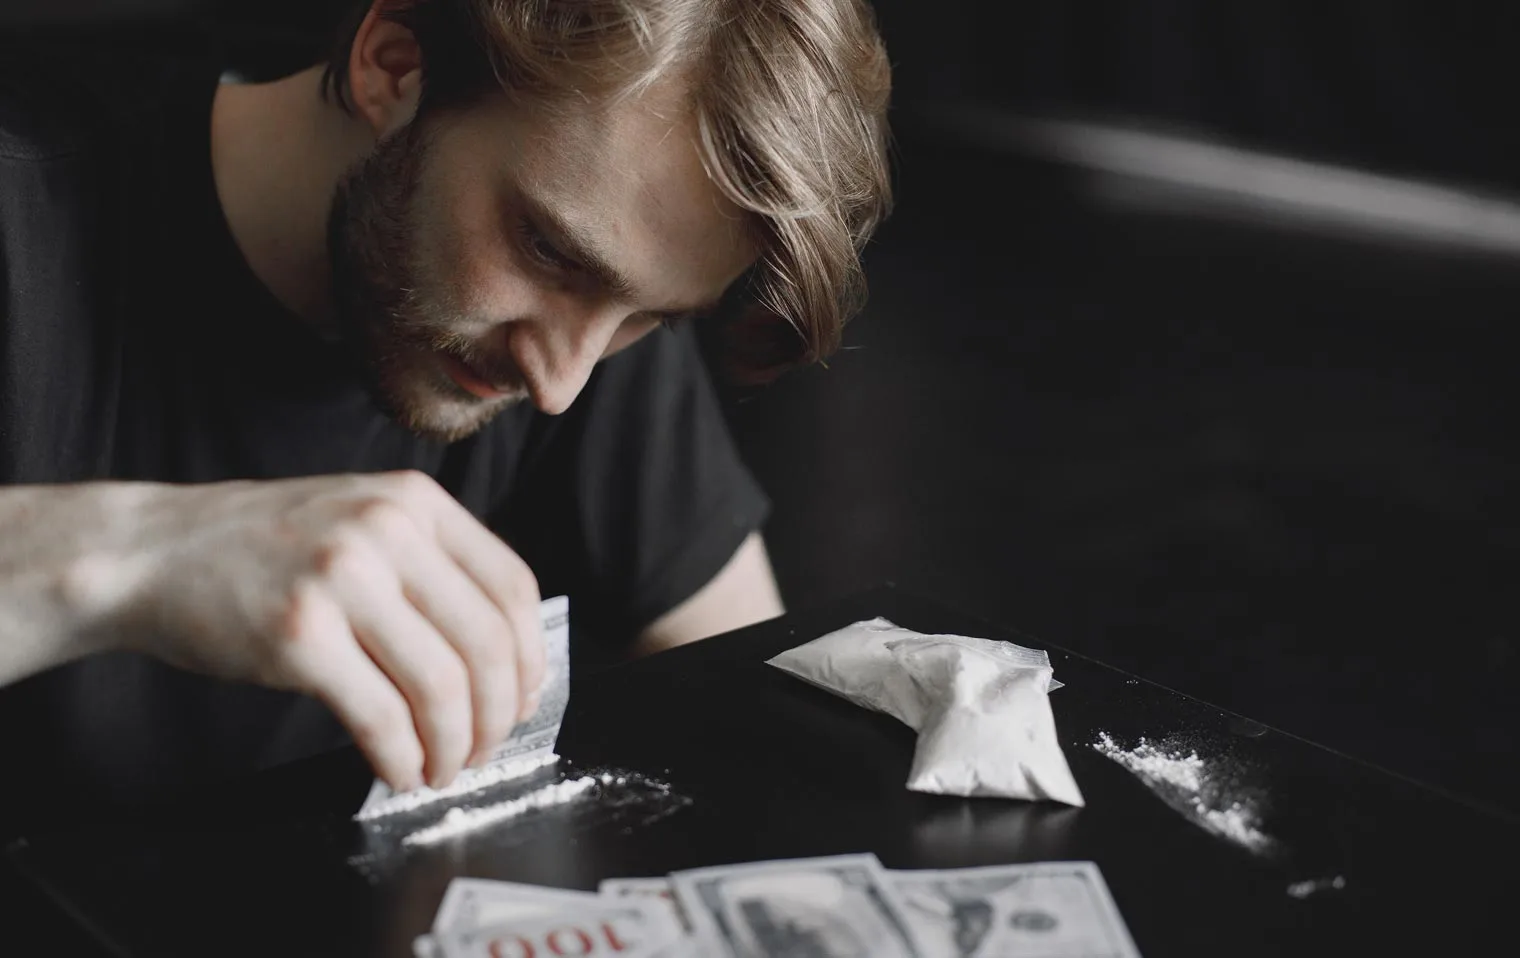 Can cocaine kill you? A man chops up lines of coke and does not know the risks involved